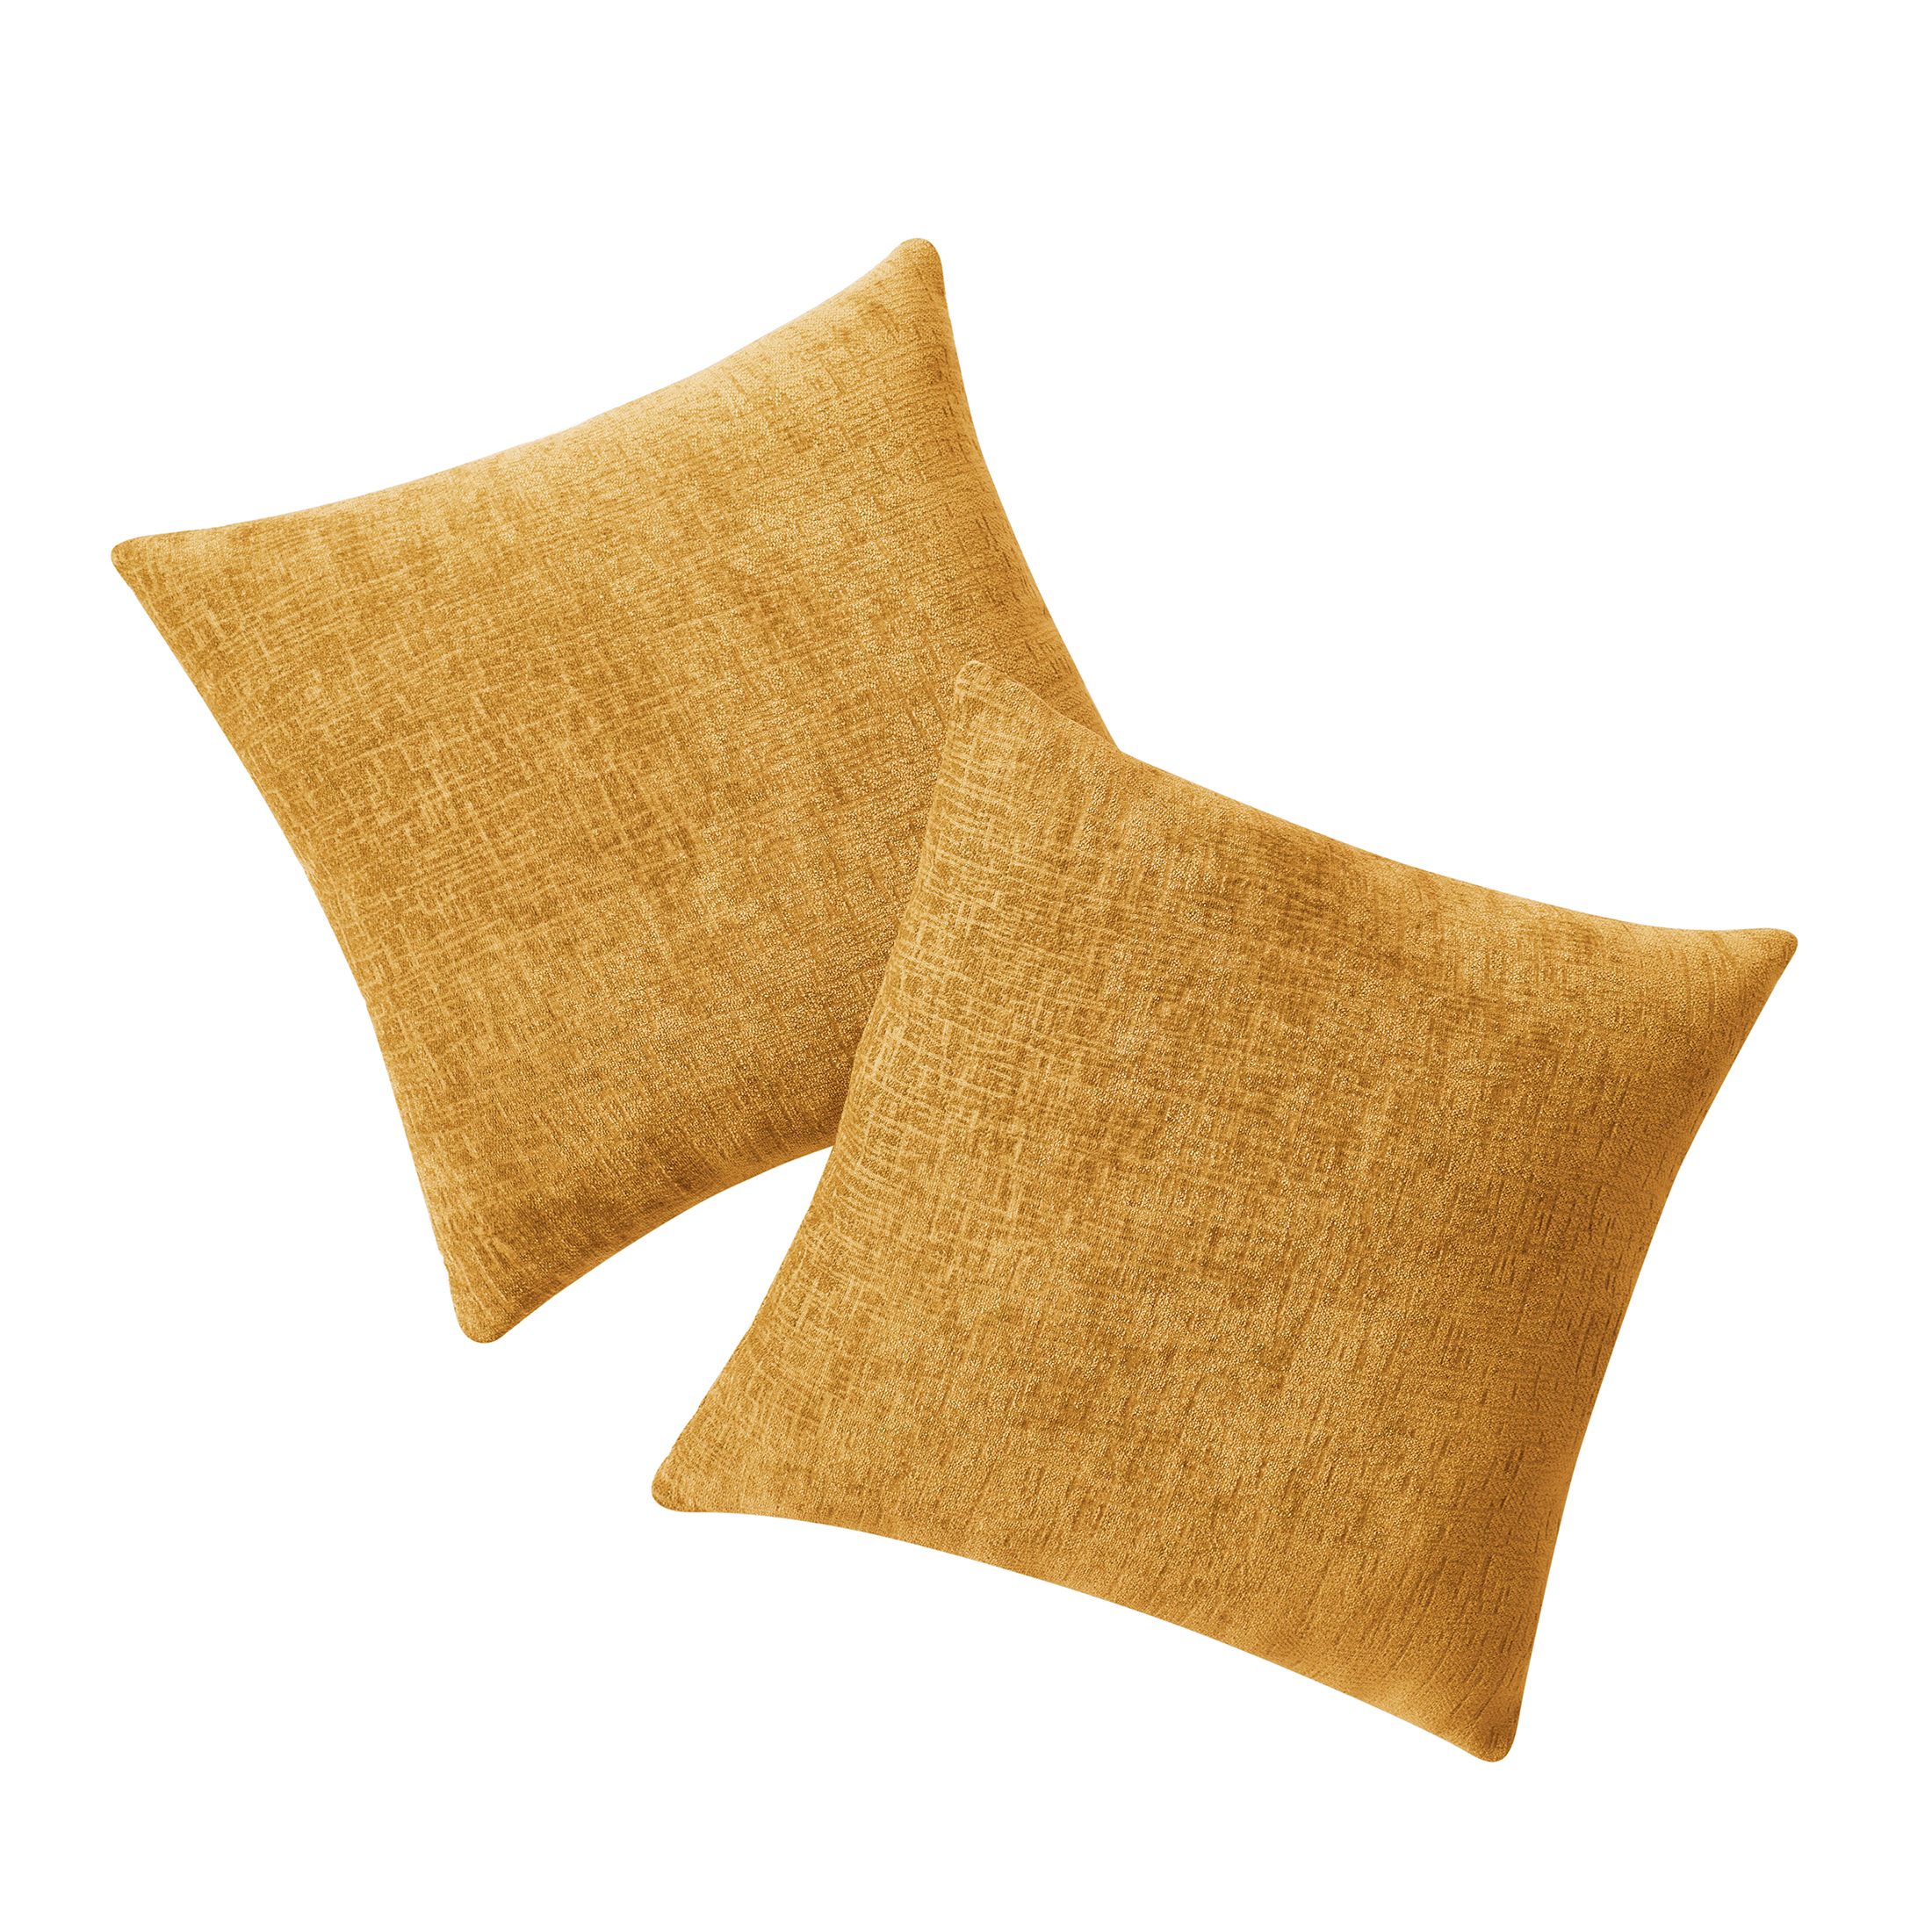 Mainstays Chenille 18" x 18" Gold Solid Polyester Decorative Pillows (2 Count) - image 2 of 5